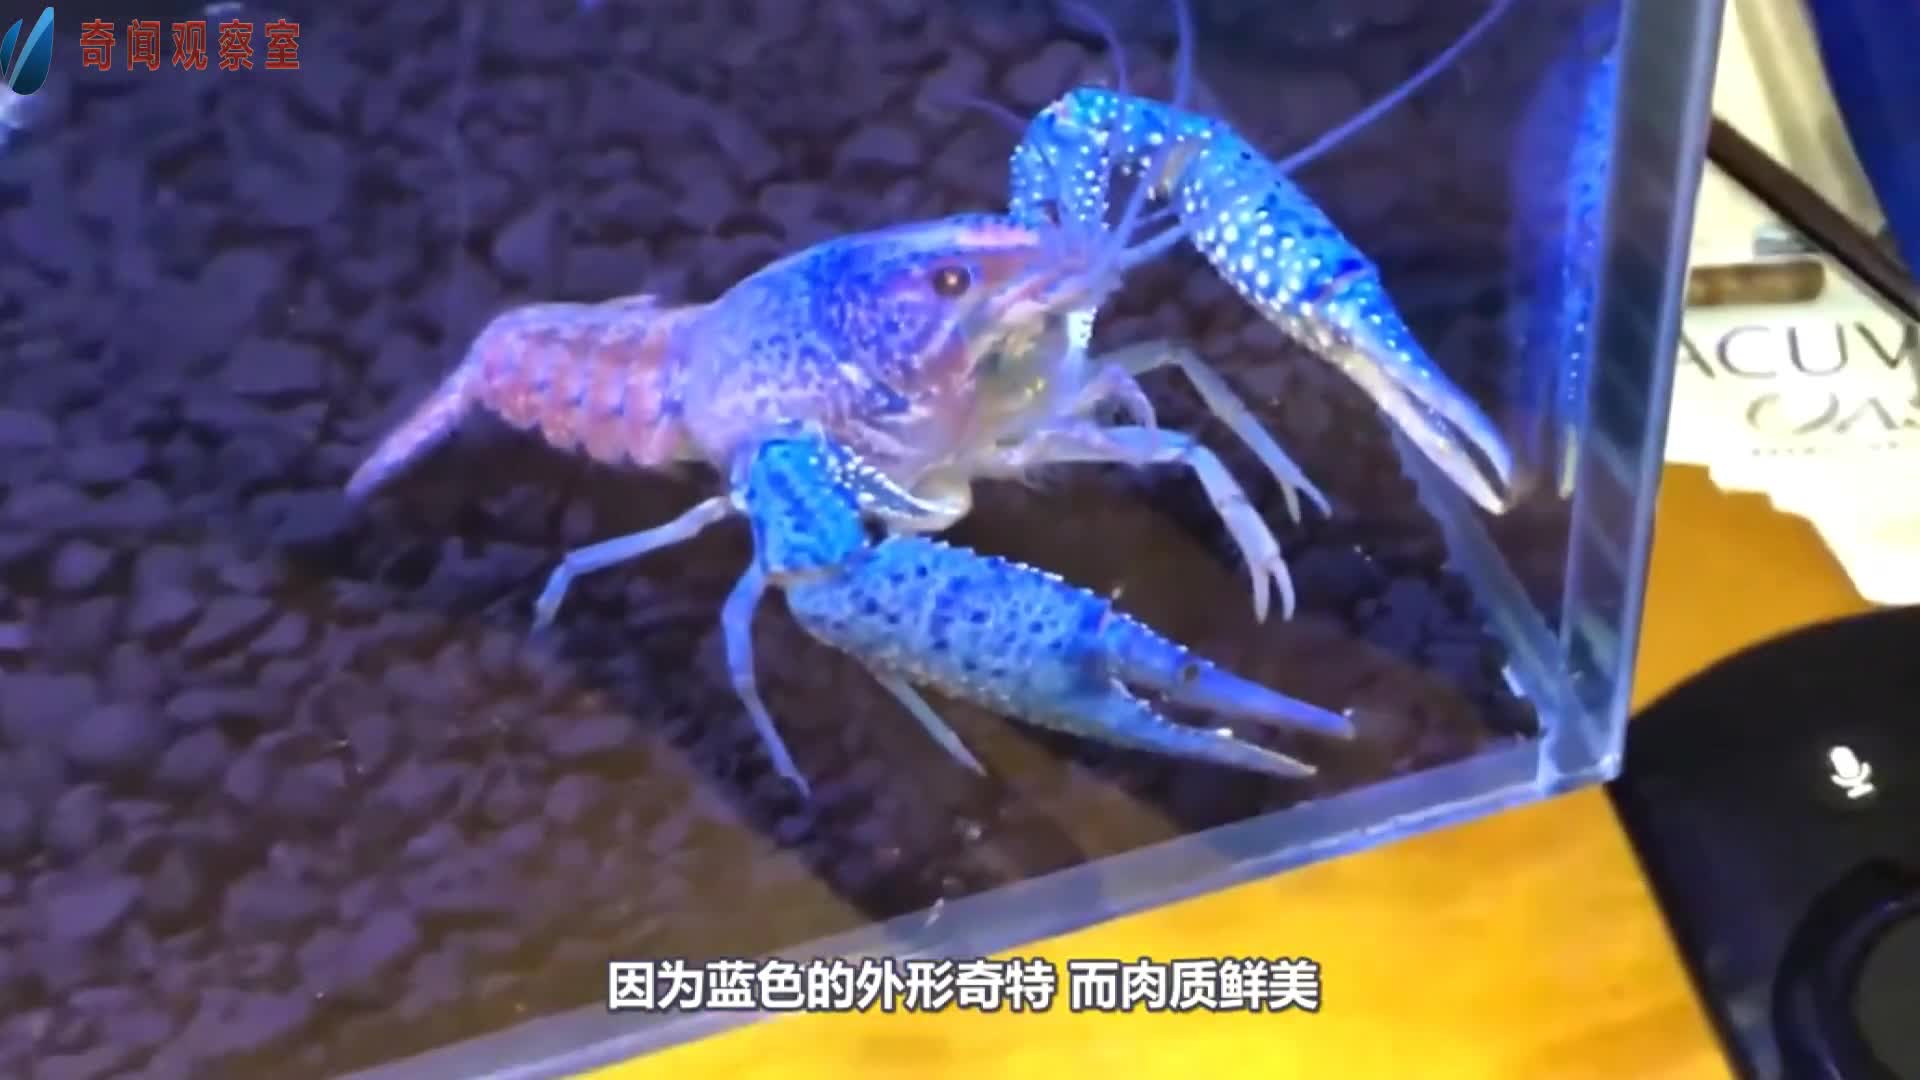 How expensive is blue lobster? A big basket of unexpected gains has been made by foreigners. Guess what the result is.